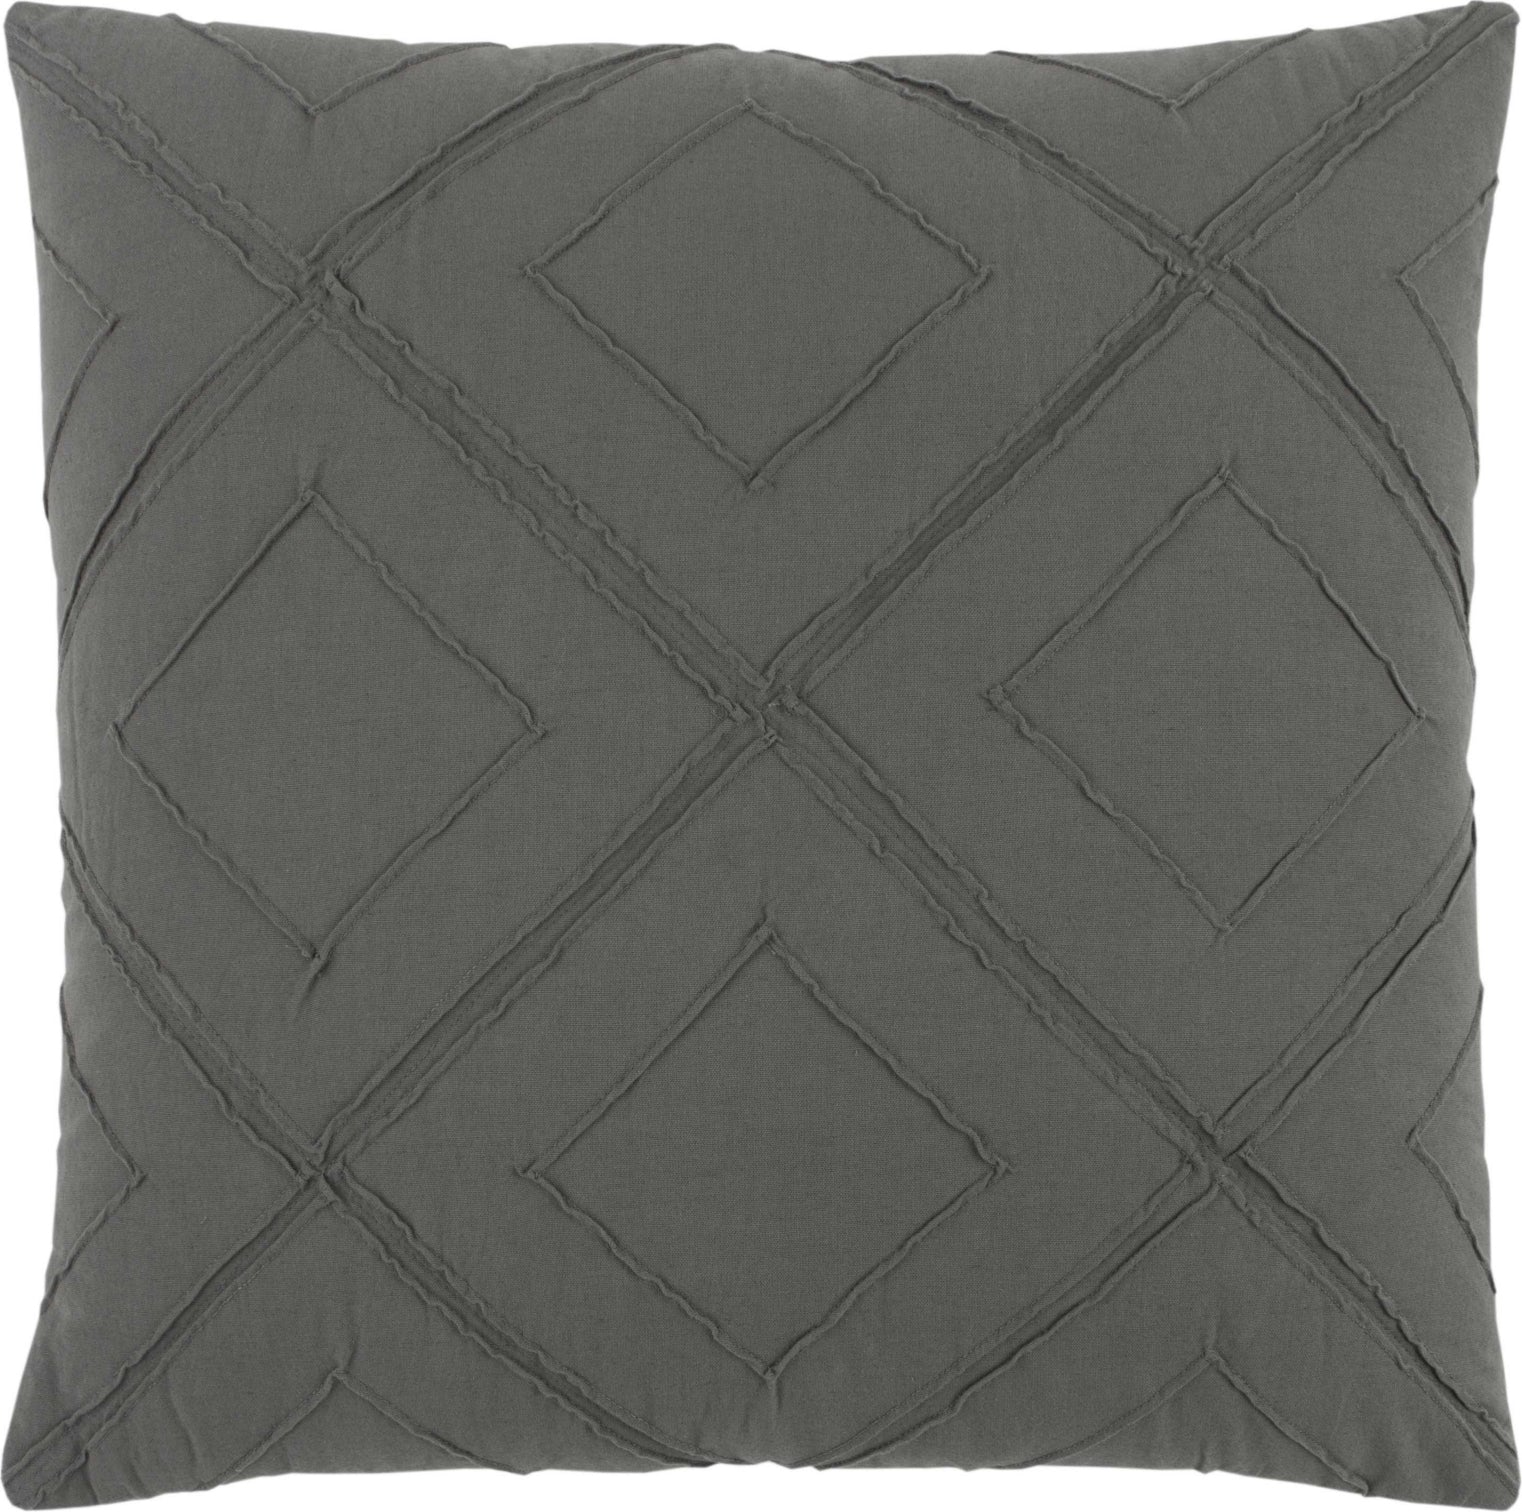 Rizzy Pillows T13257 Charcoal